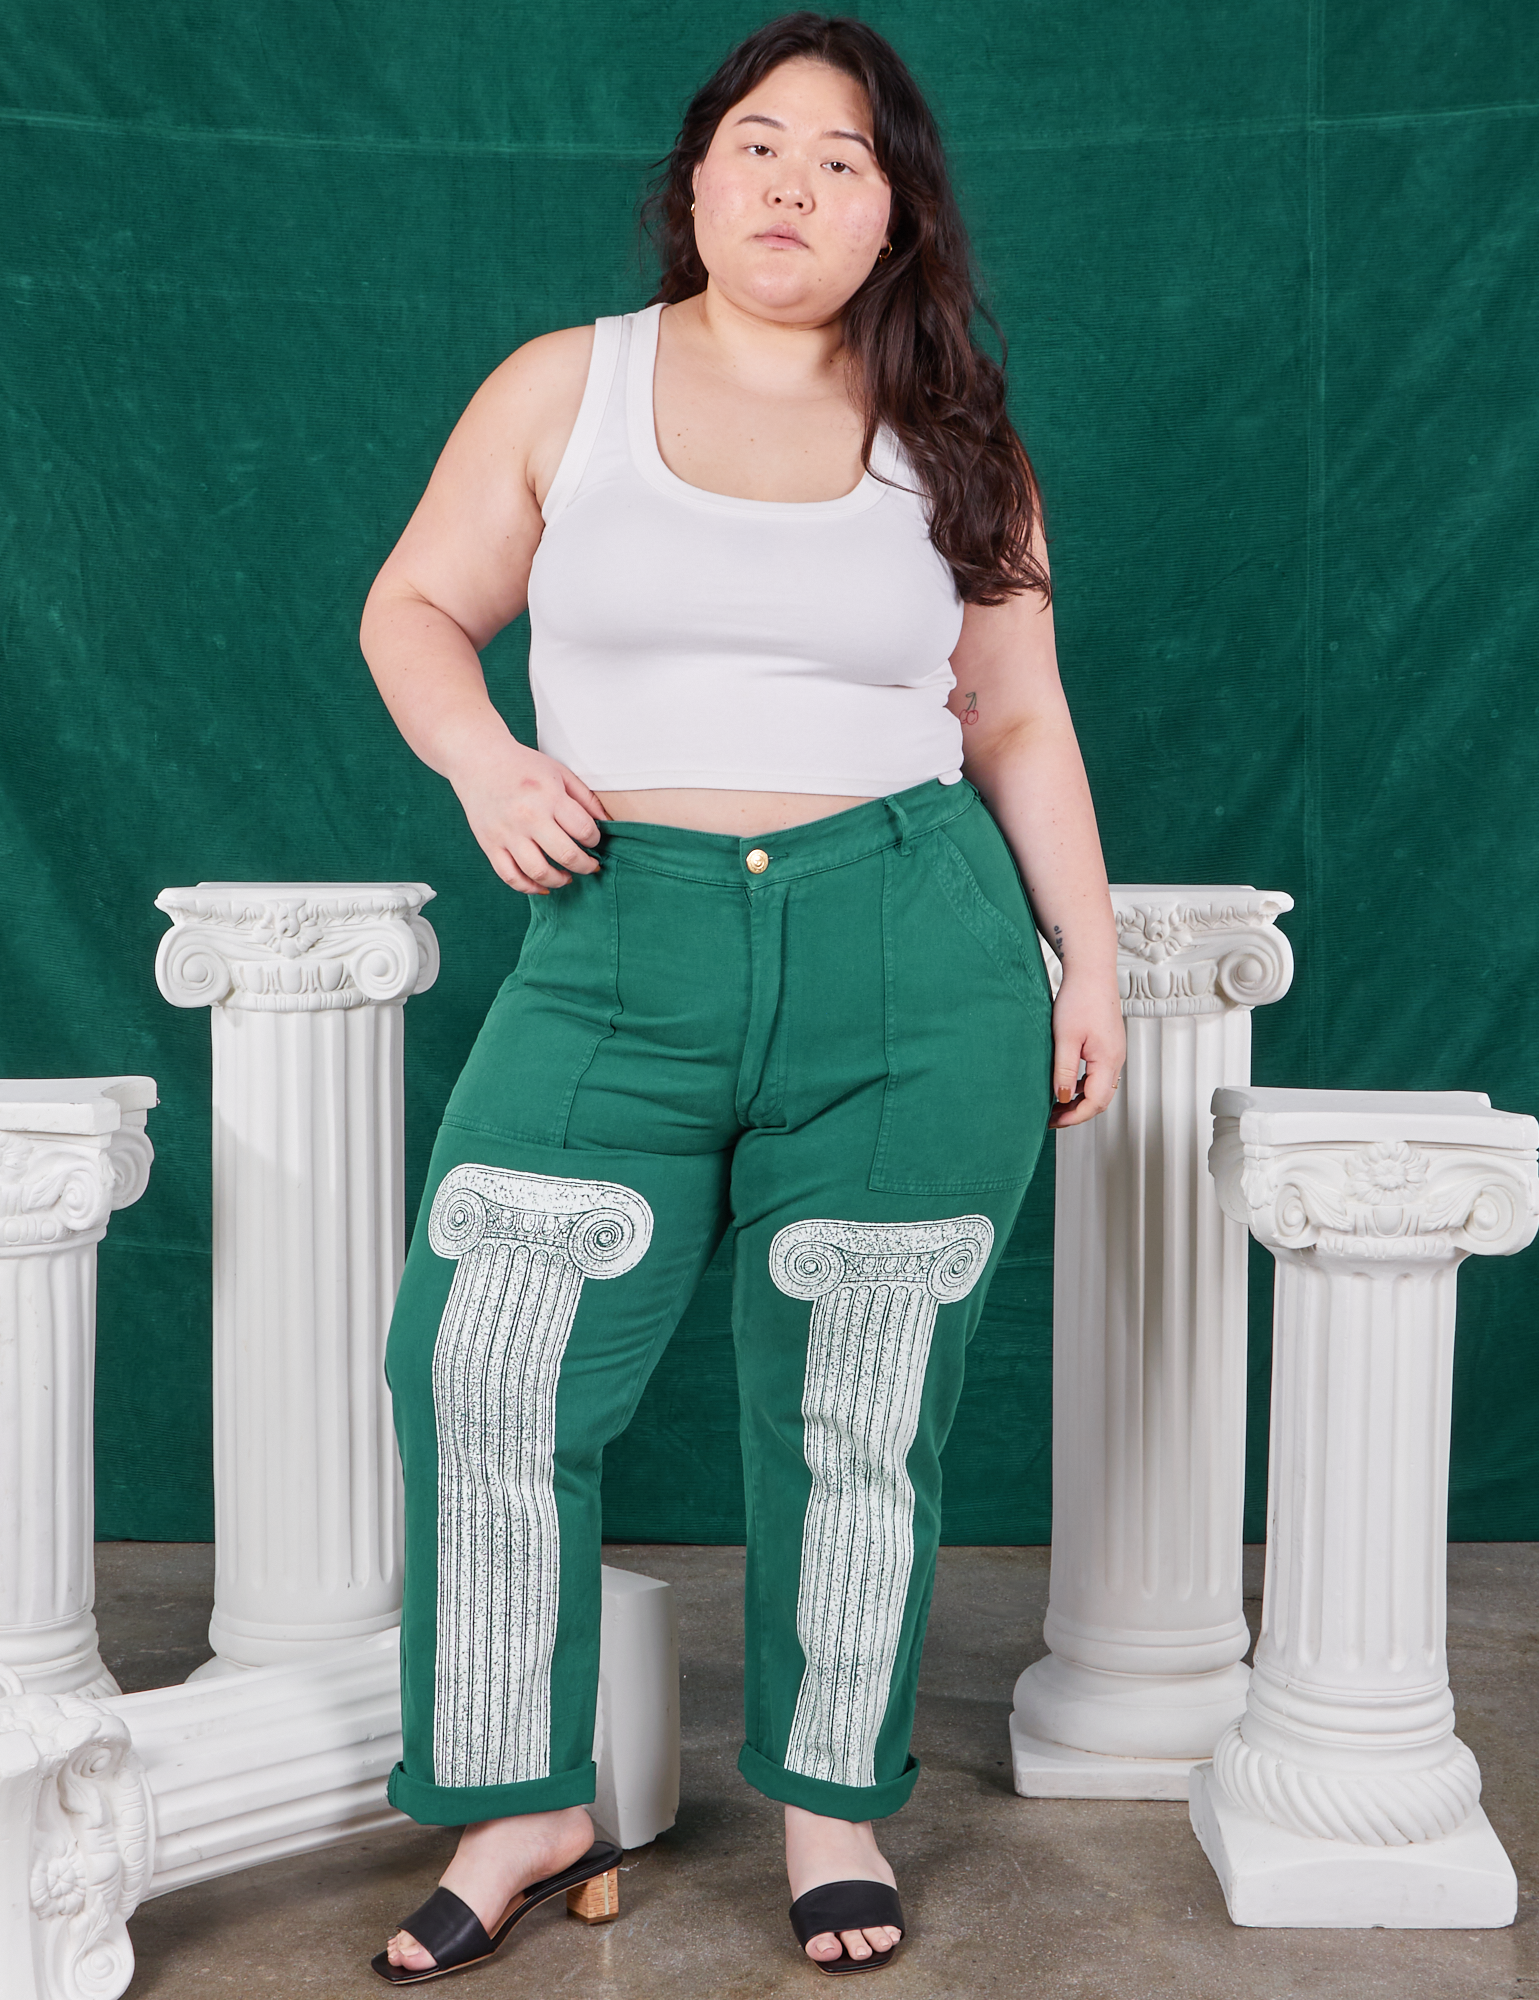 Ashley is 5'7" and wearing 1XL Column Work Pants in Hunter Green paired with vintage off-white Cropped Tank Top